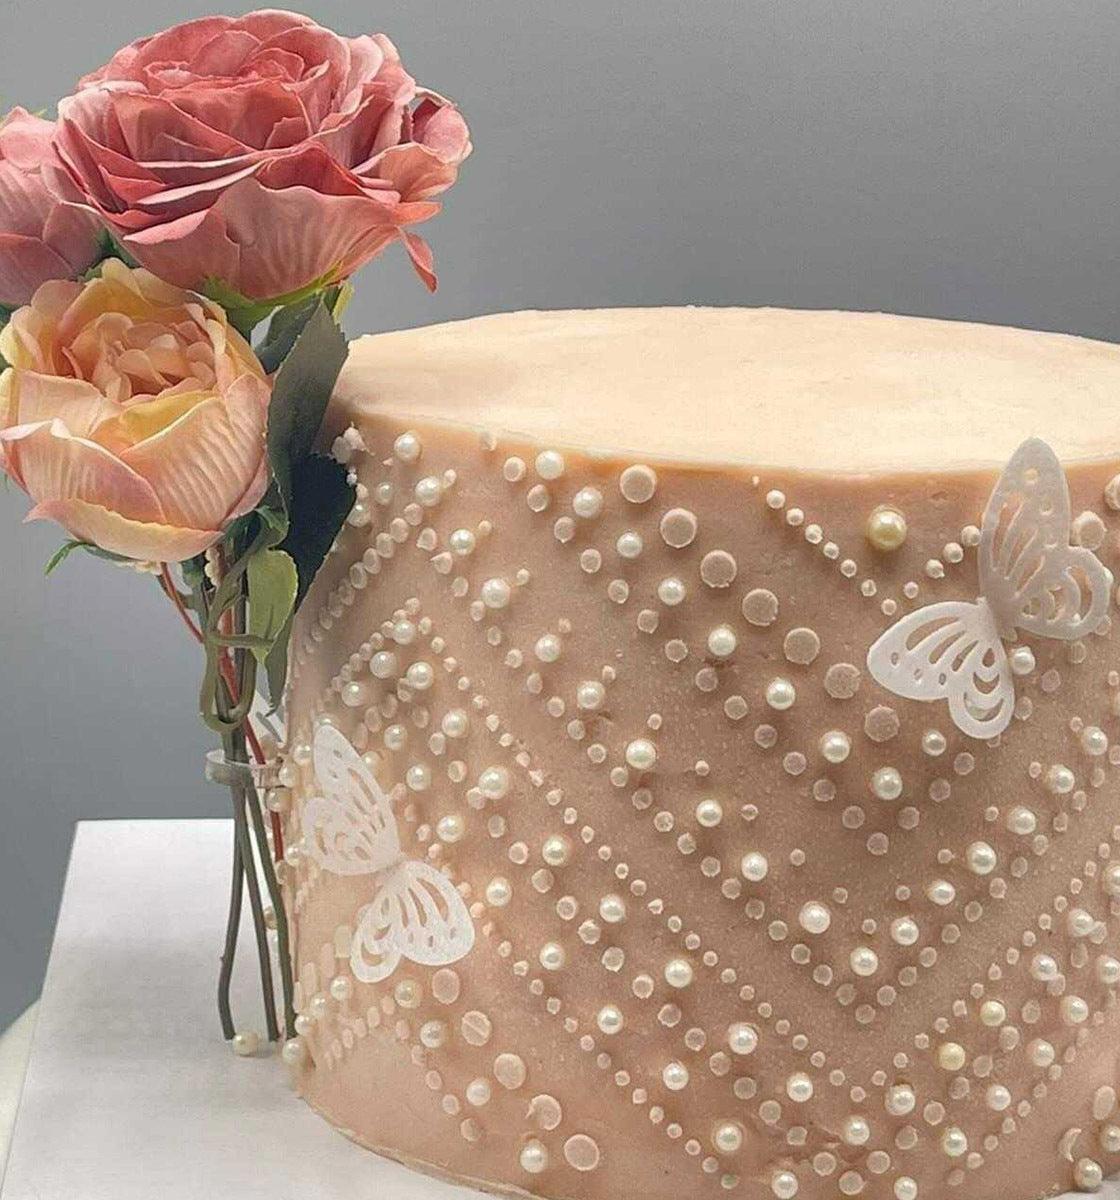 Floral Cake Pins | Cake Decoration Essential - Inspired Baking Pakistan